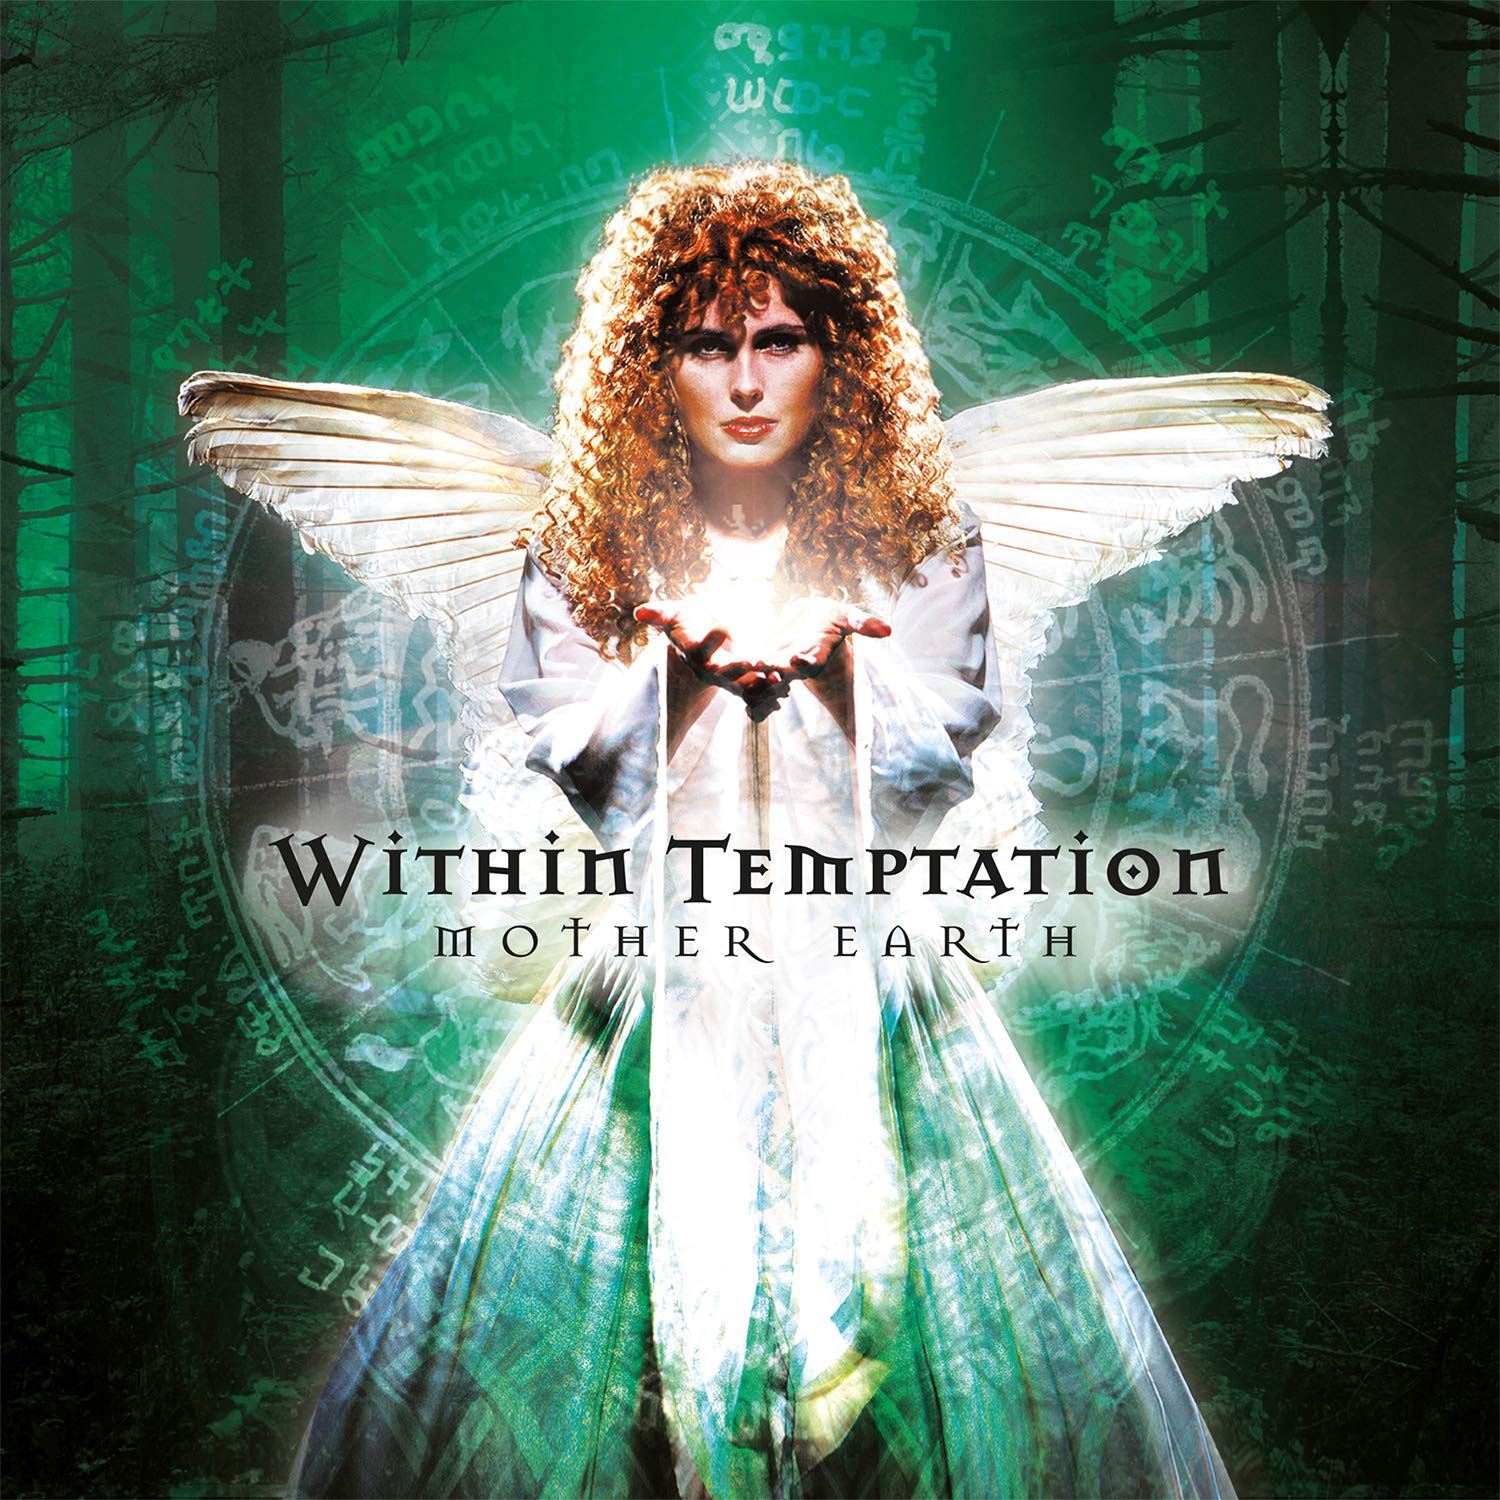 Within Temptation - Mother Earth vinyl cover